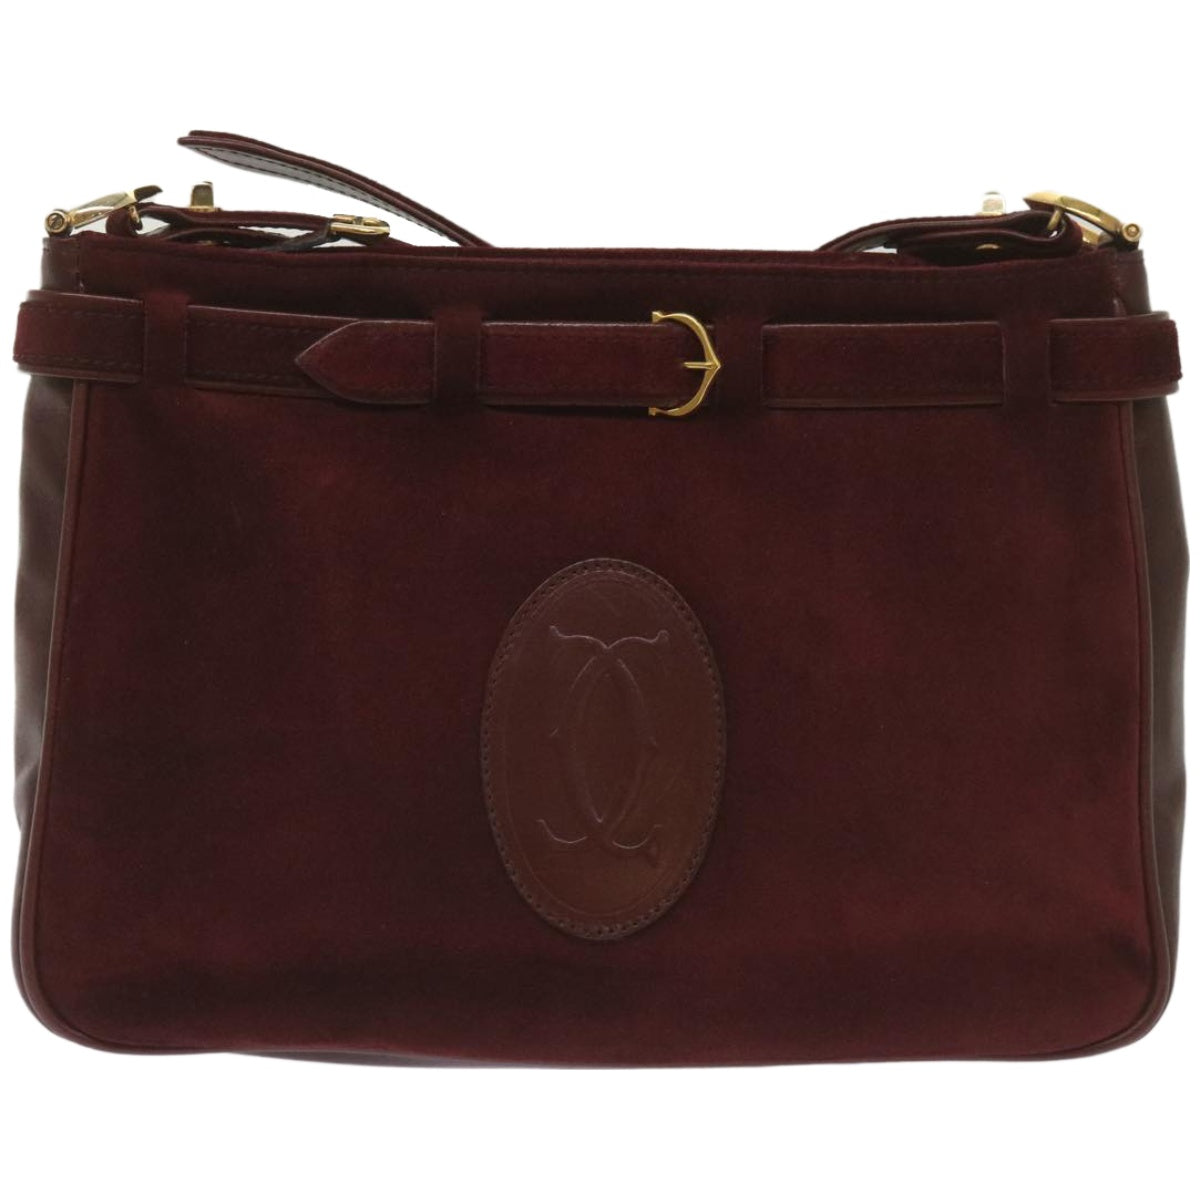 CARTIER Shoulder Bag Suede Leather Wine Red Auth 68255 - 0